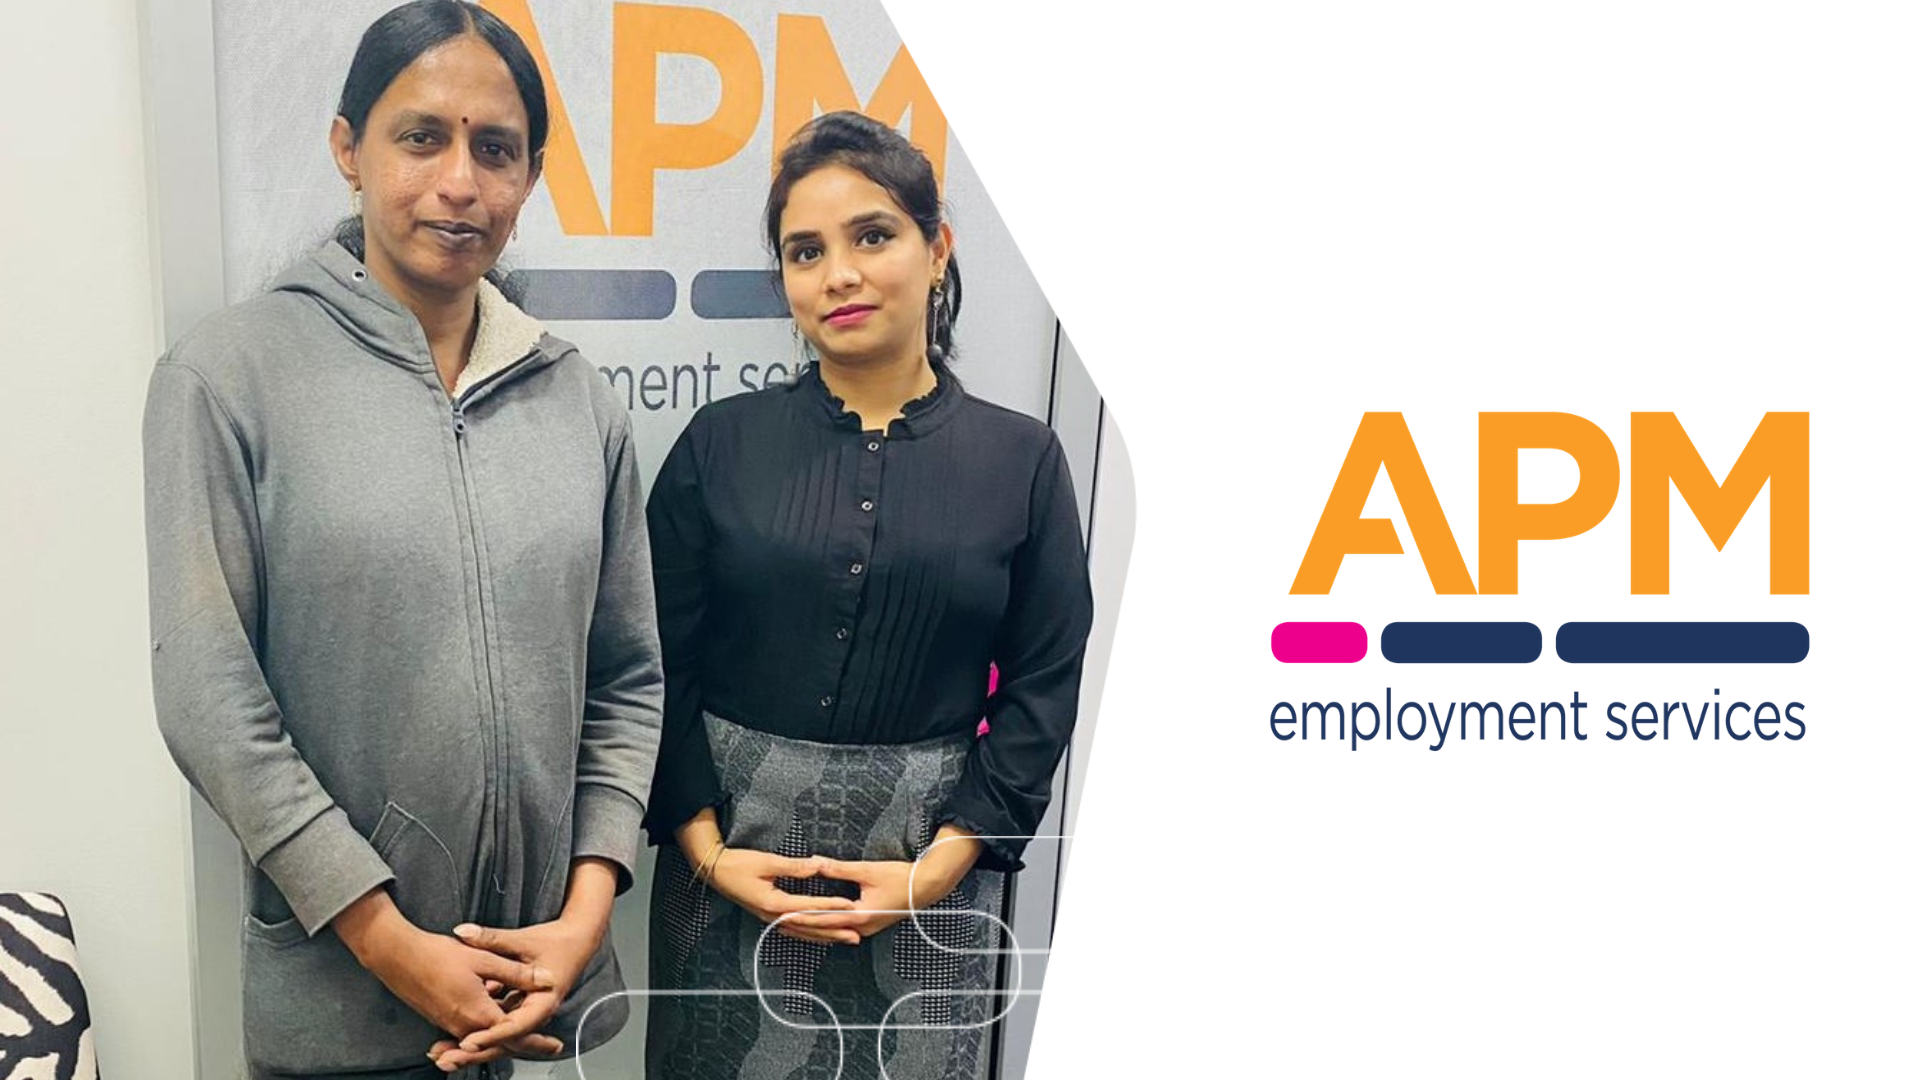 Anita and Harpreet are pictures standing together in front of the APM Burwood office, in front of a door with the APM logo on it